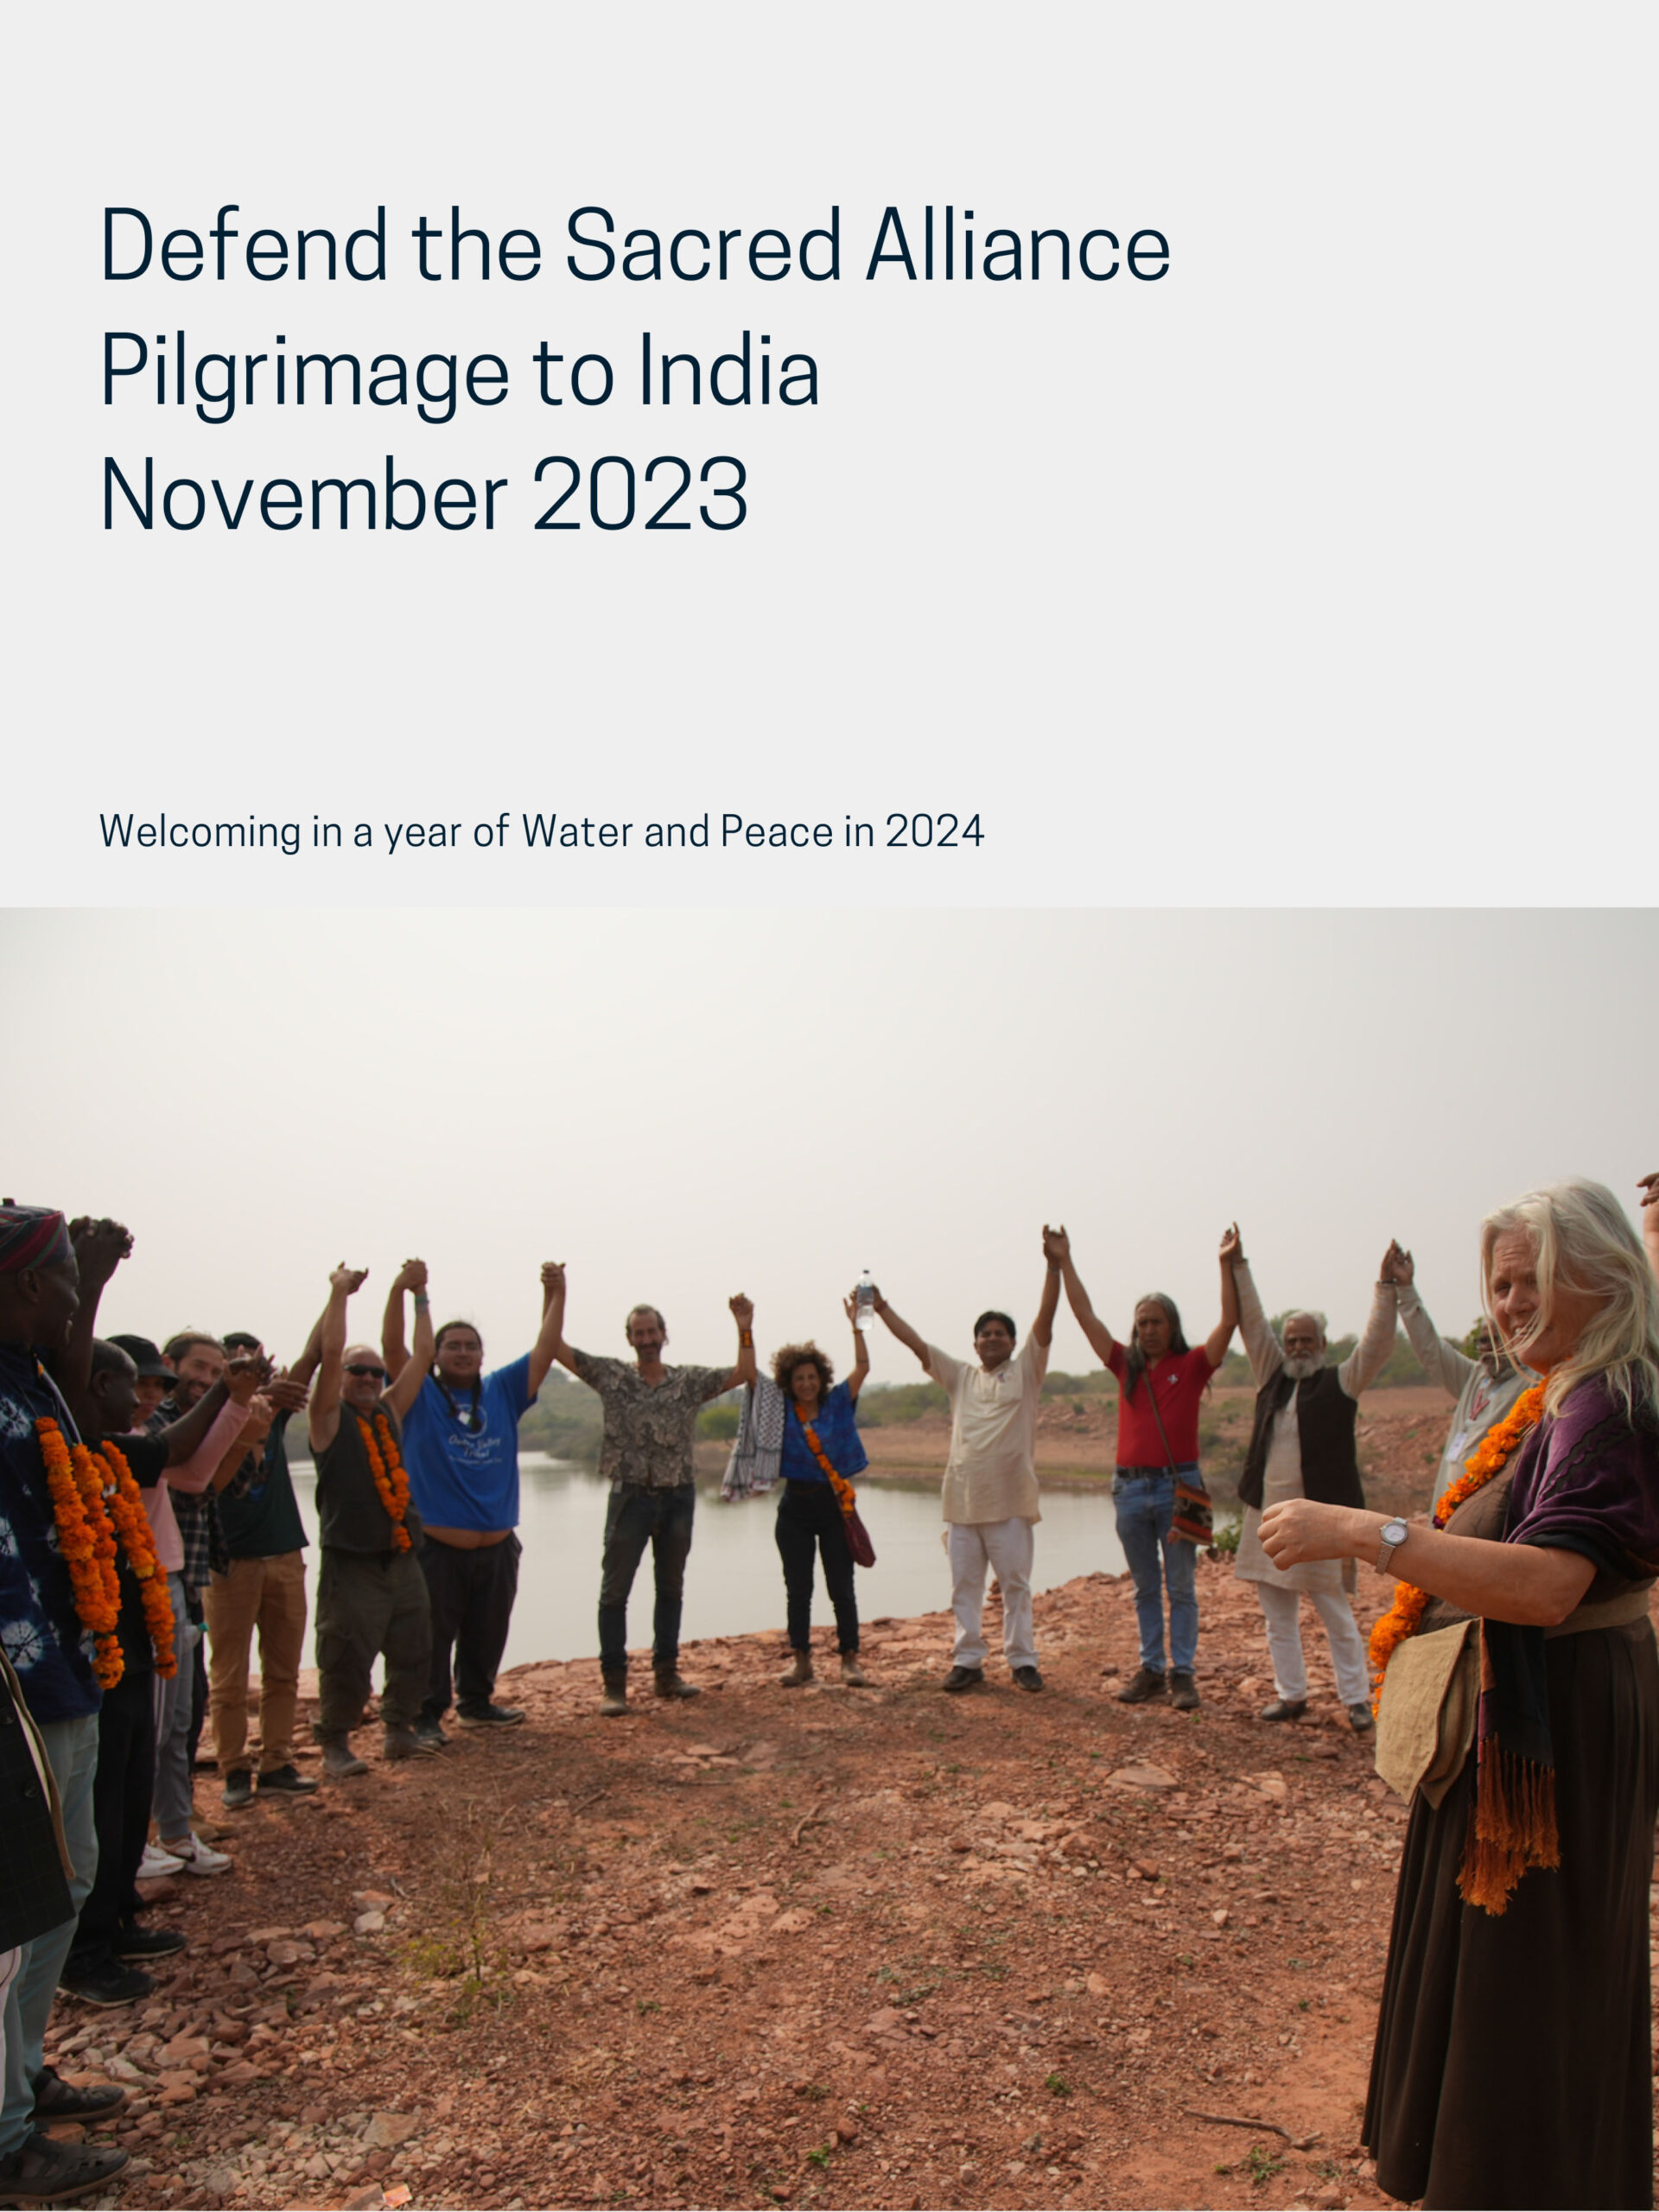 Pilgrimage Defend the Sacred Alliance with the Waterman of India Rajendra Singh